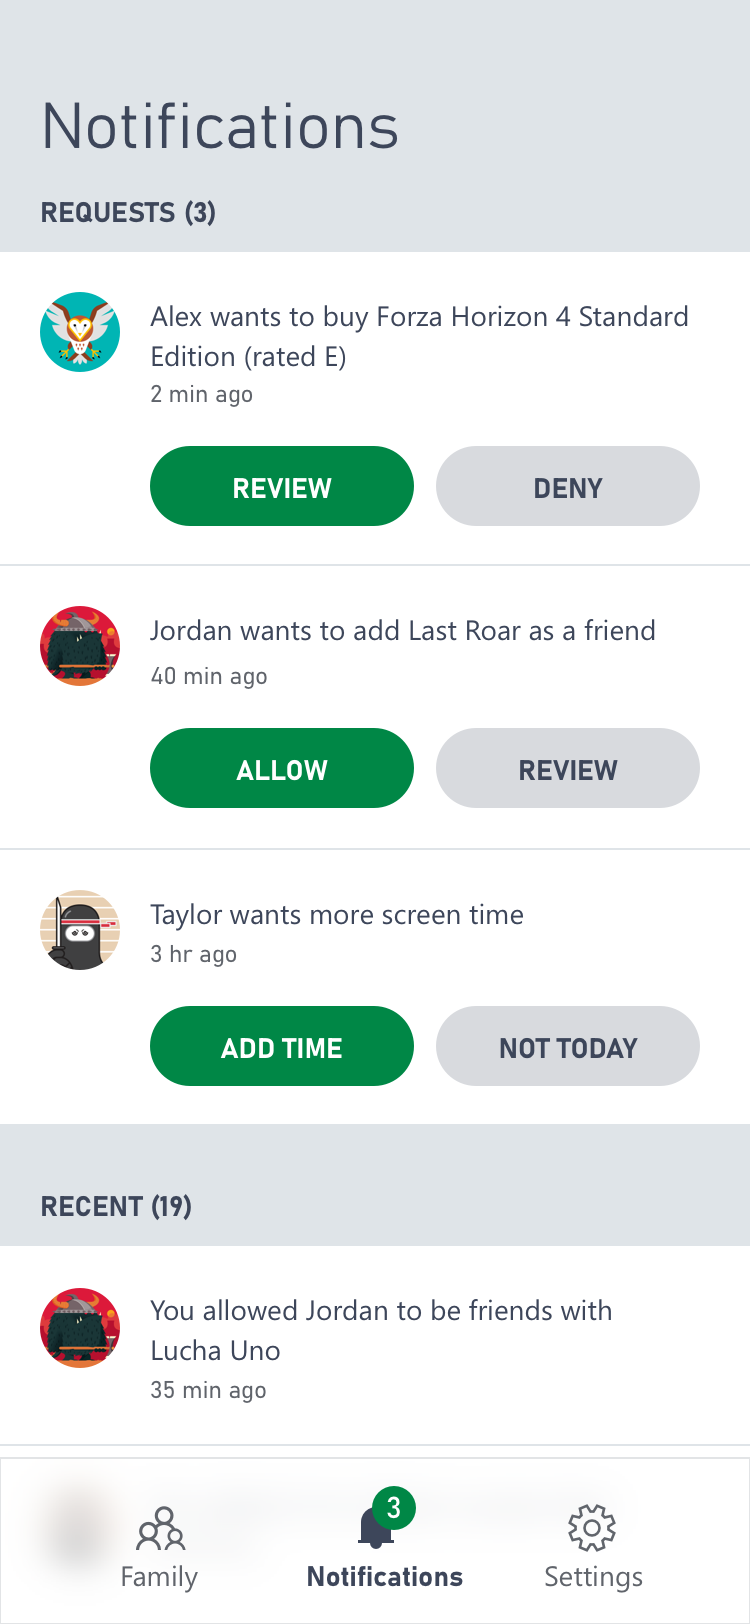 View Friends Activity & Activity Timeline of a Friend in Xbox app